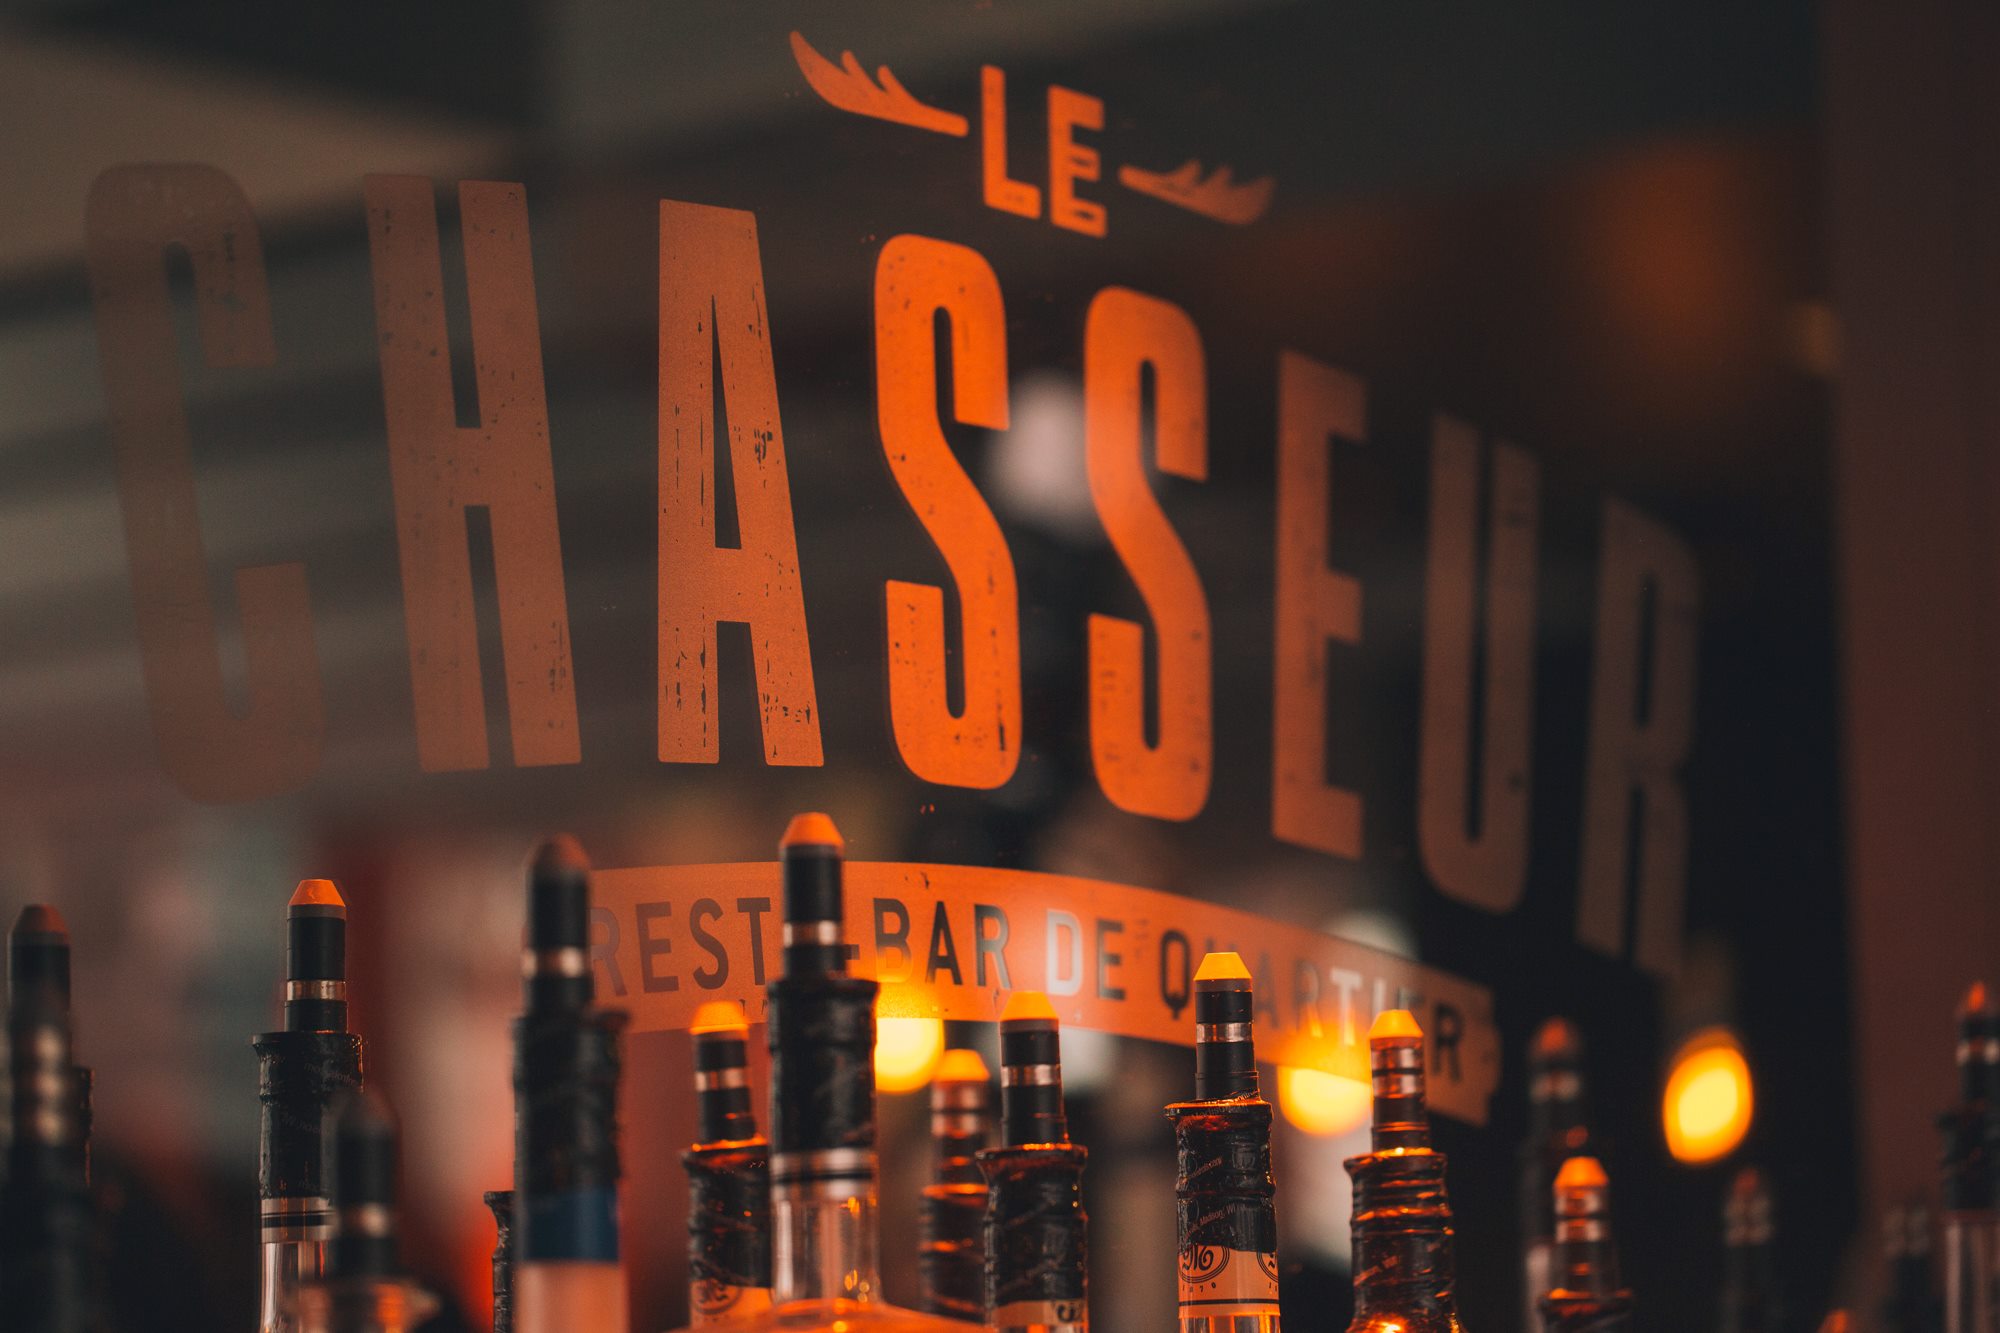 Le Chasseur serves its last in two weeks